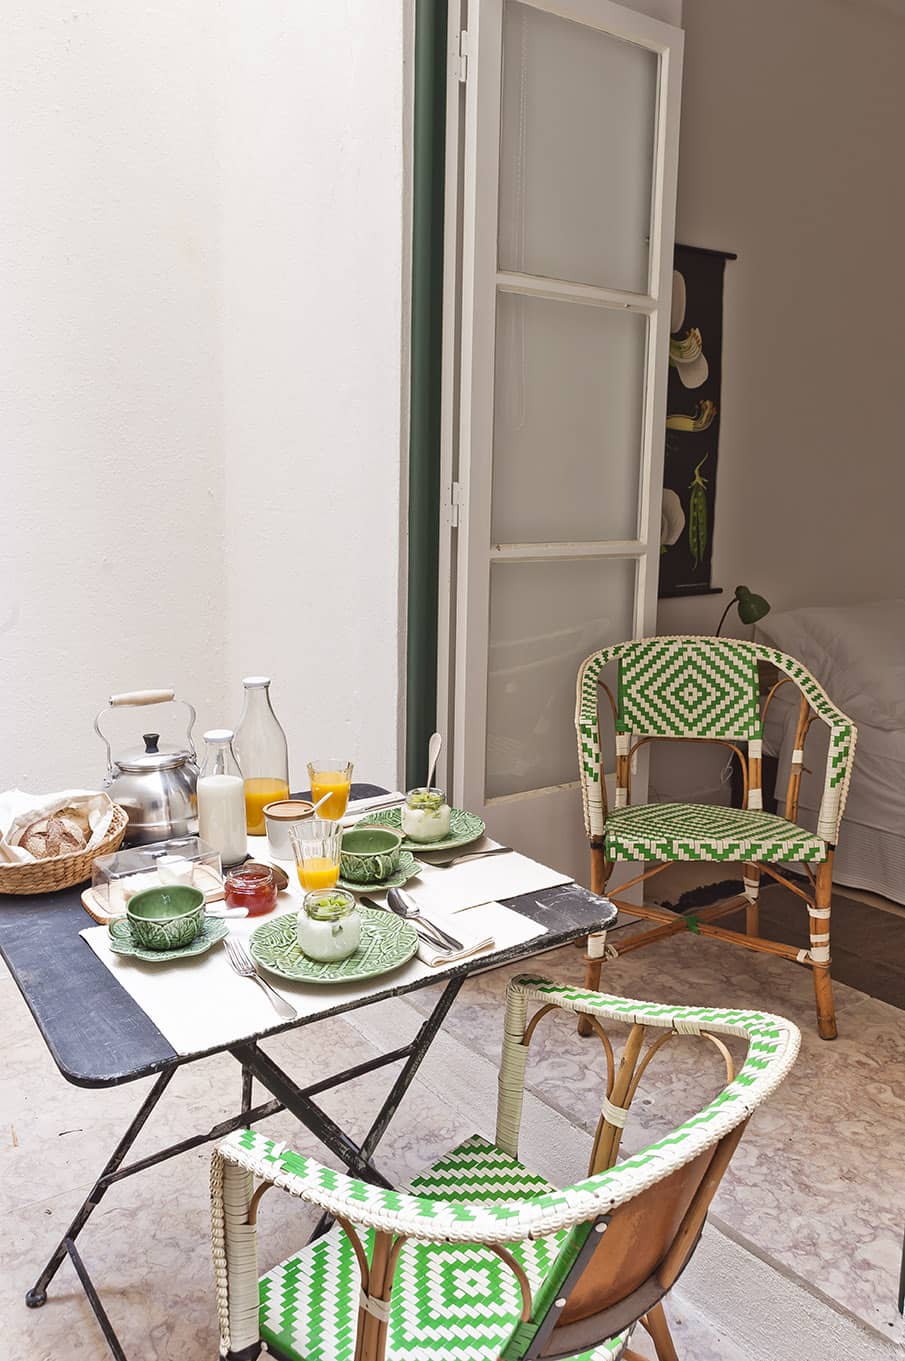 You Gotta Stay Here: Baixa House in Lisbon, Portugal on apartment 34